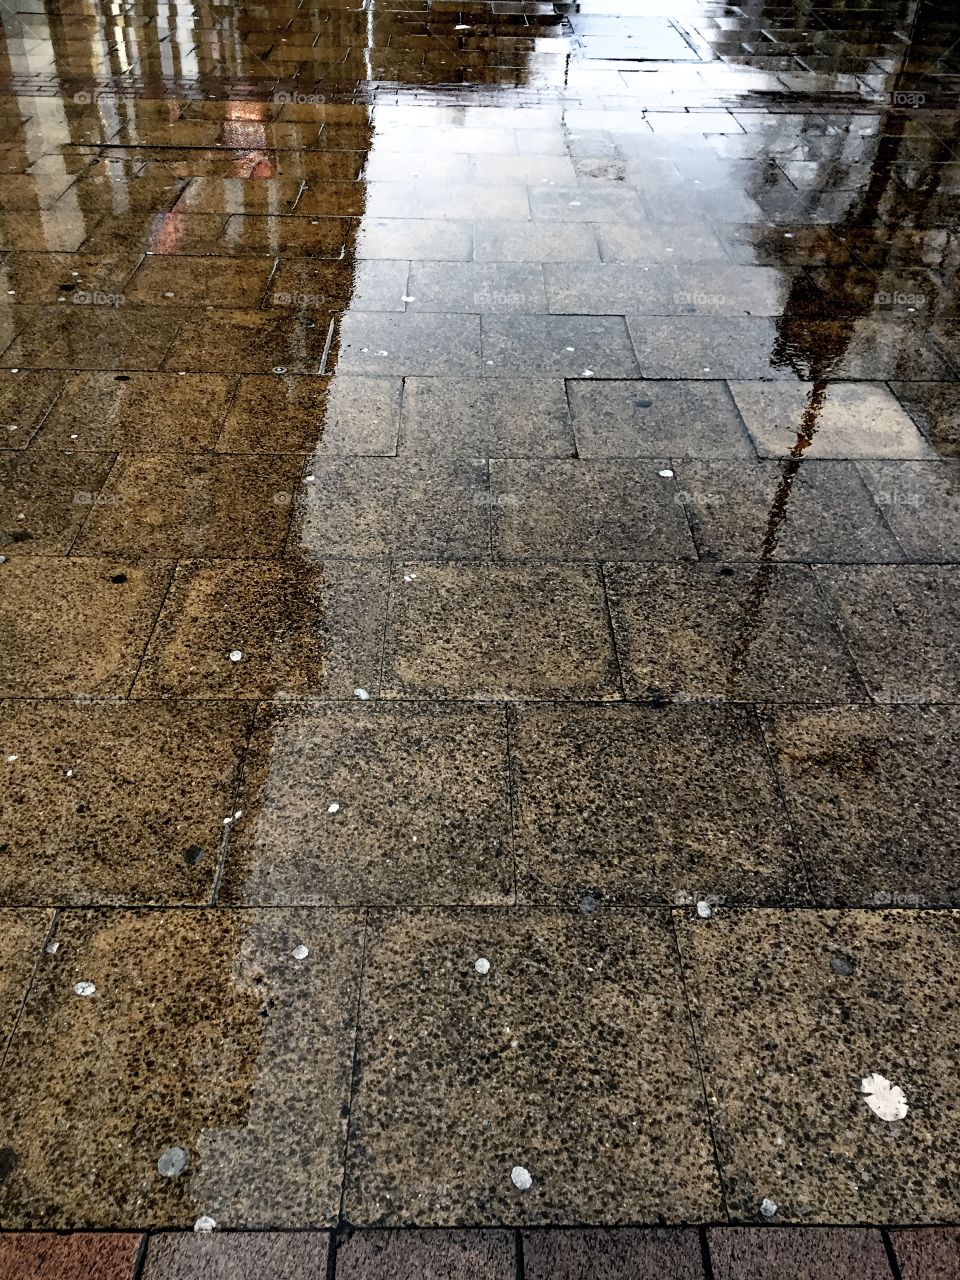 Reflections on wet pavement 